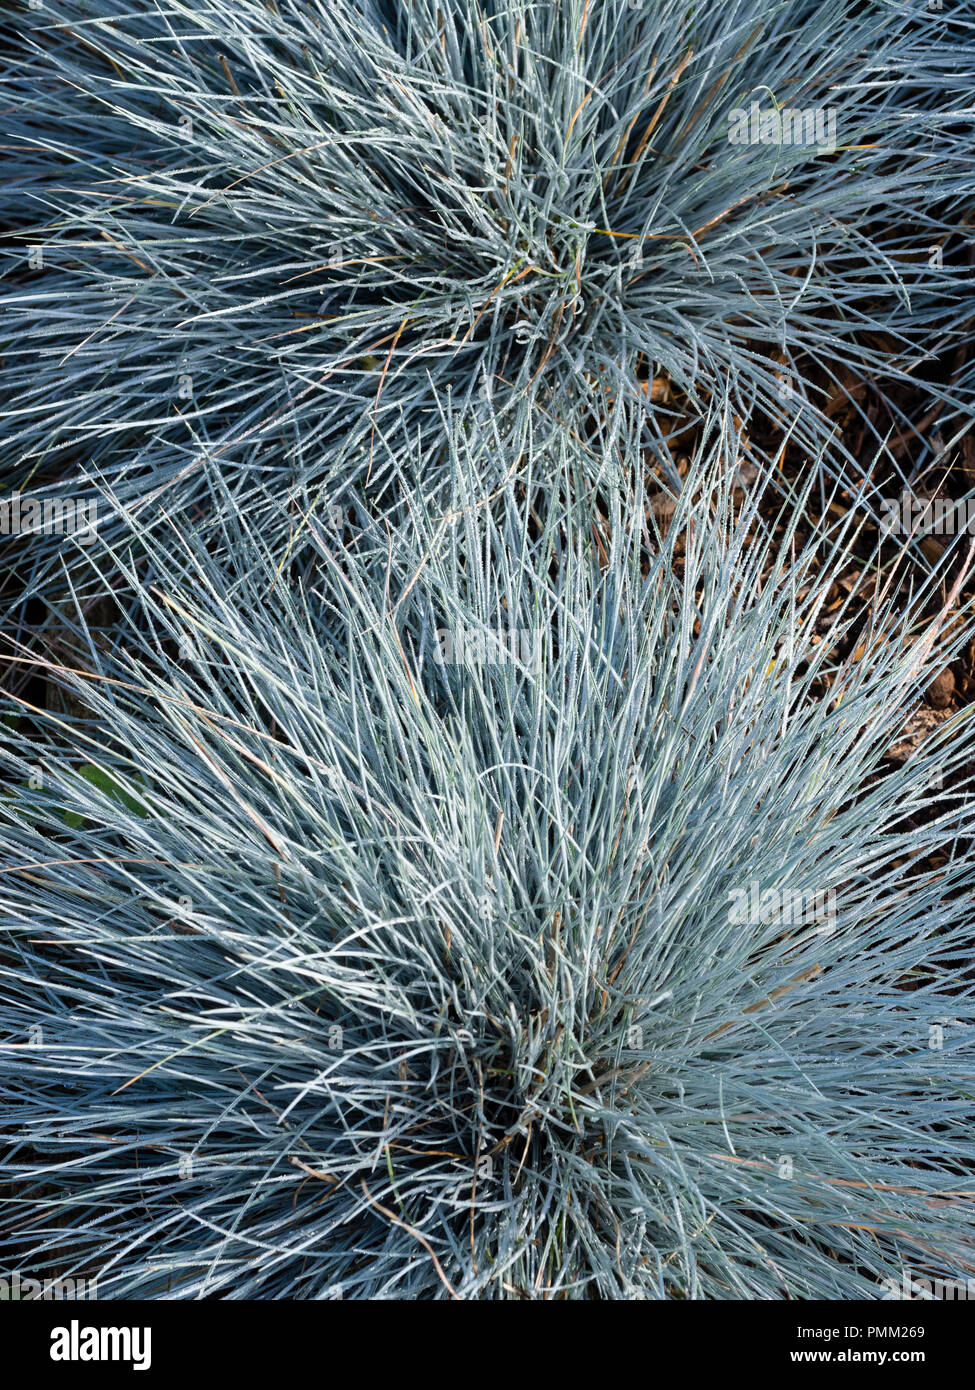 Bright silvery blue foliage of the hardy, mound forming perennial grass, Festuca glauca 'Elijah Blue' Stock Photo